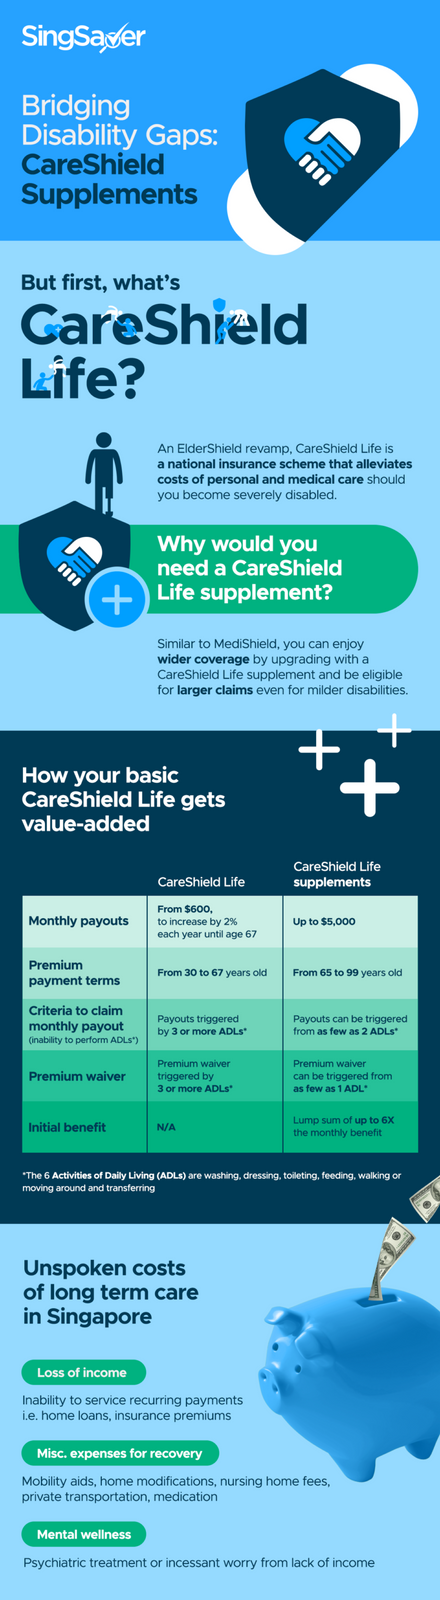 Careshield Life Supplements Infographic 720x2616 ?d=800x1600